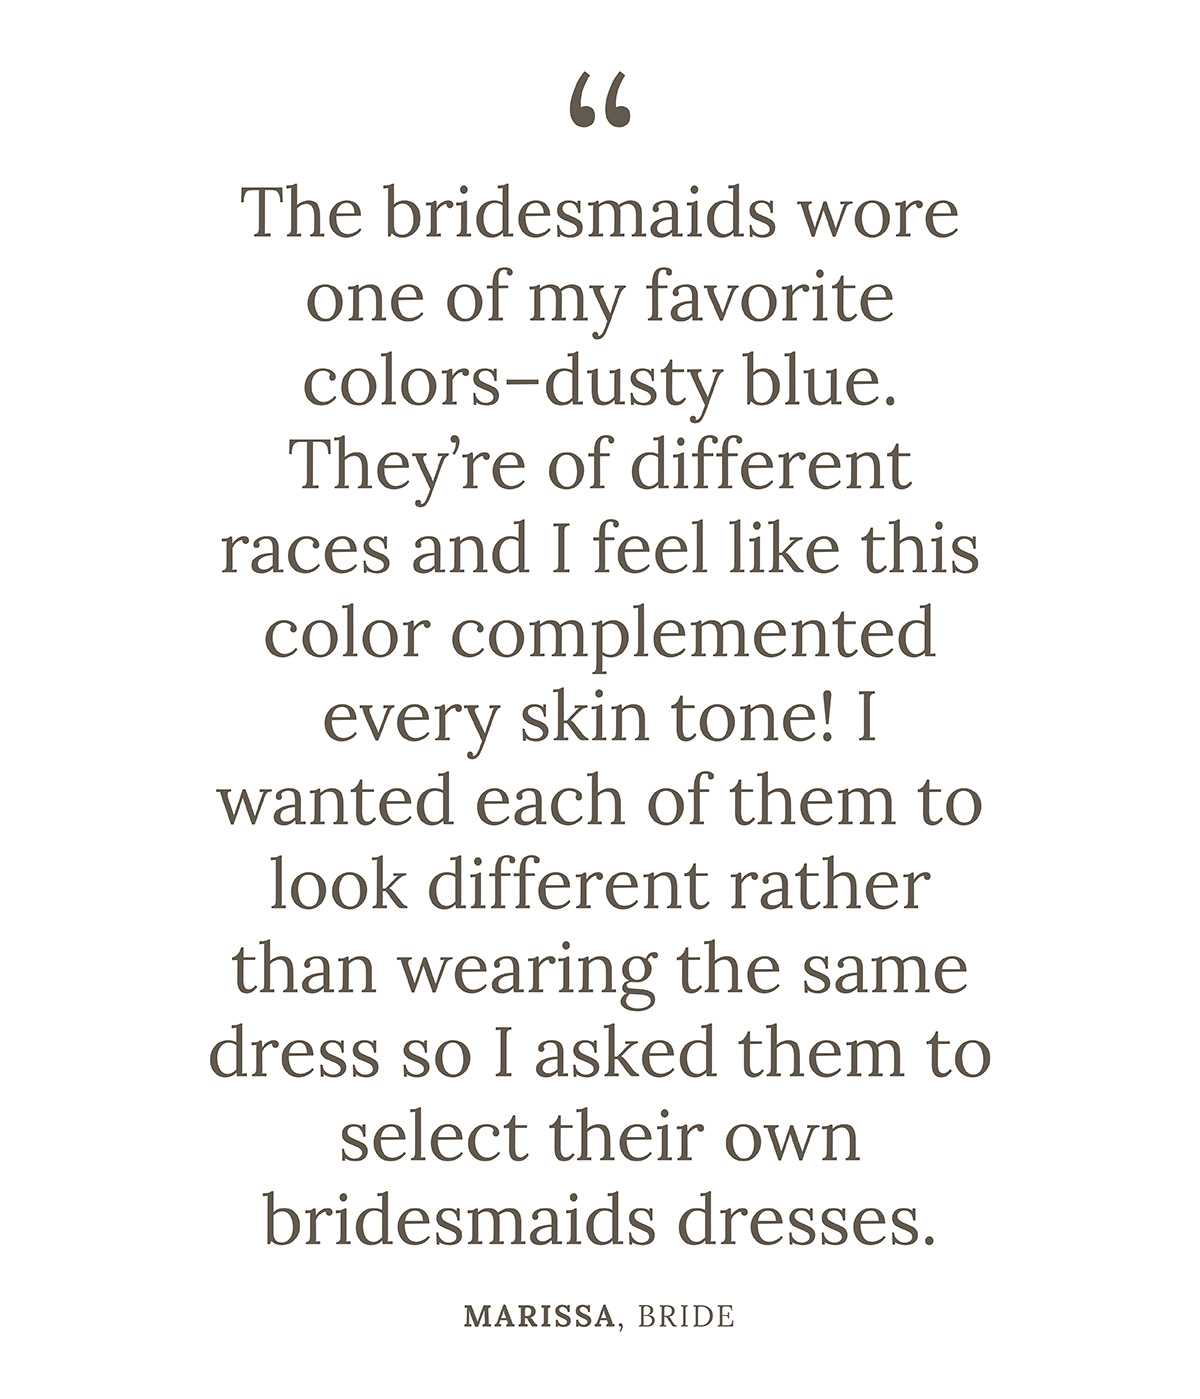 "The bridesmaids wore one of my favorite colors--dusty blue. They’re of different races and I feel like this color complemented every skin tone! I wanted each of them to look different rather than wearing the same dress so I asked them to select their own bridesmaids dresses." Marissa, Bride